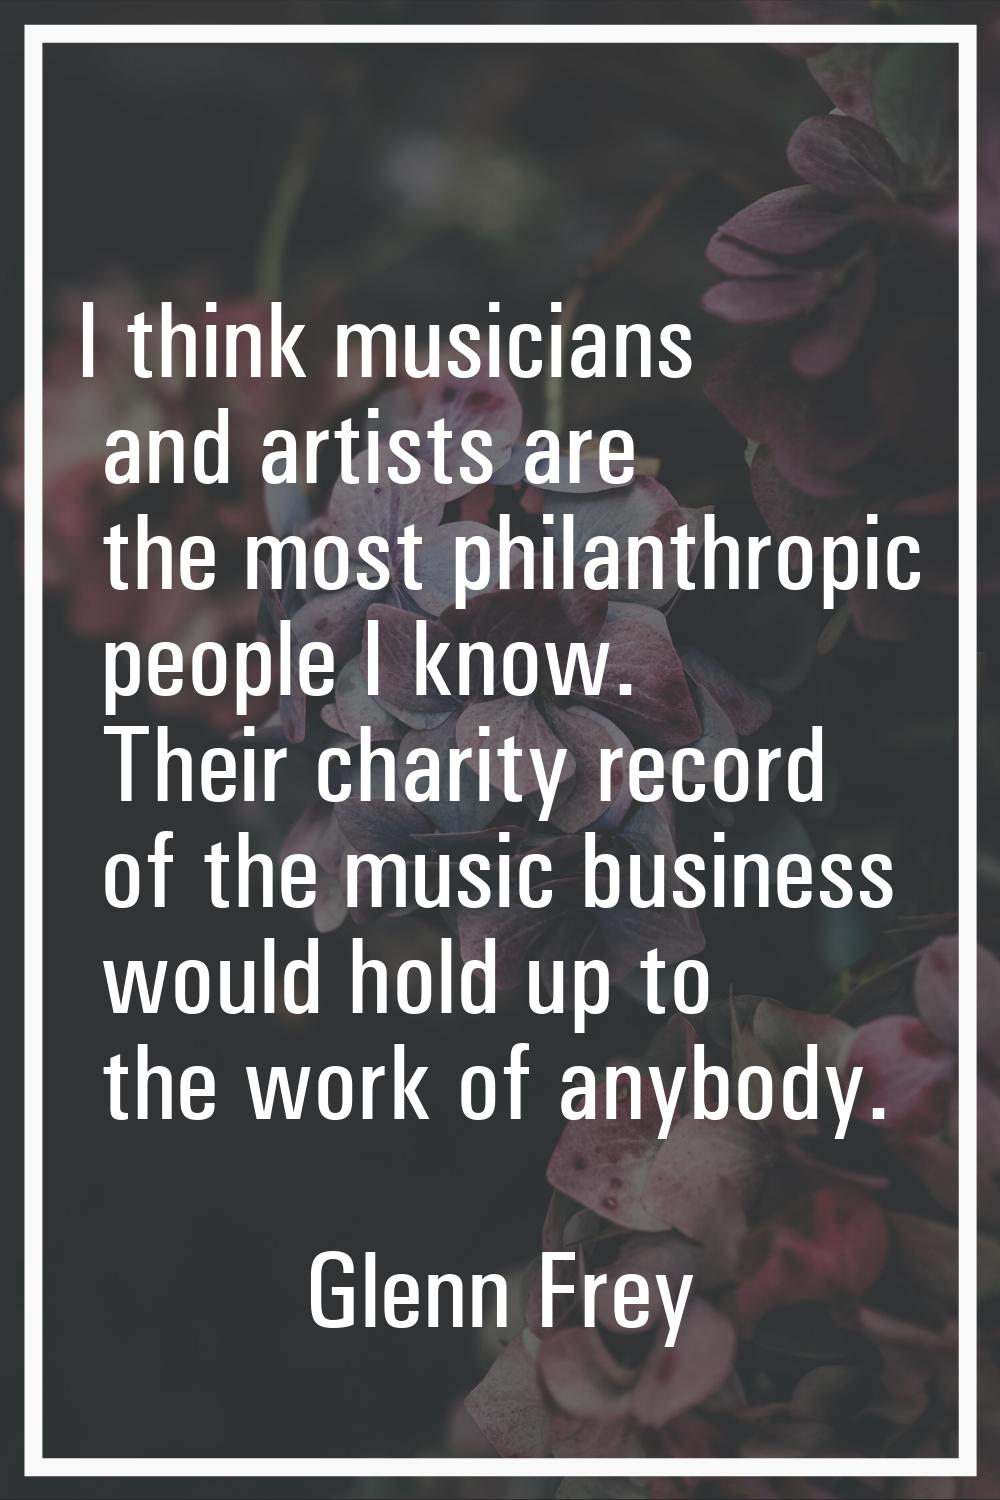 I think musicians and artists are the most philanthropic people I know. Their charity record of the